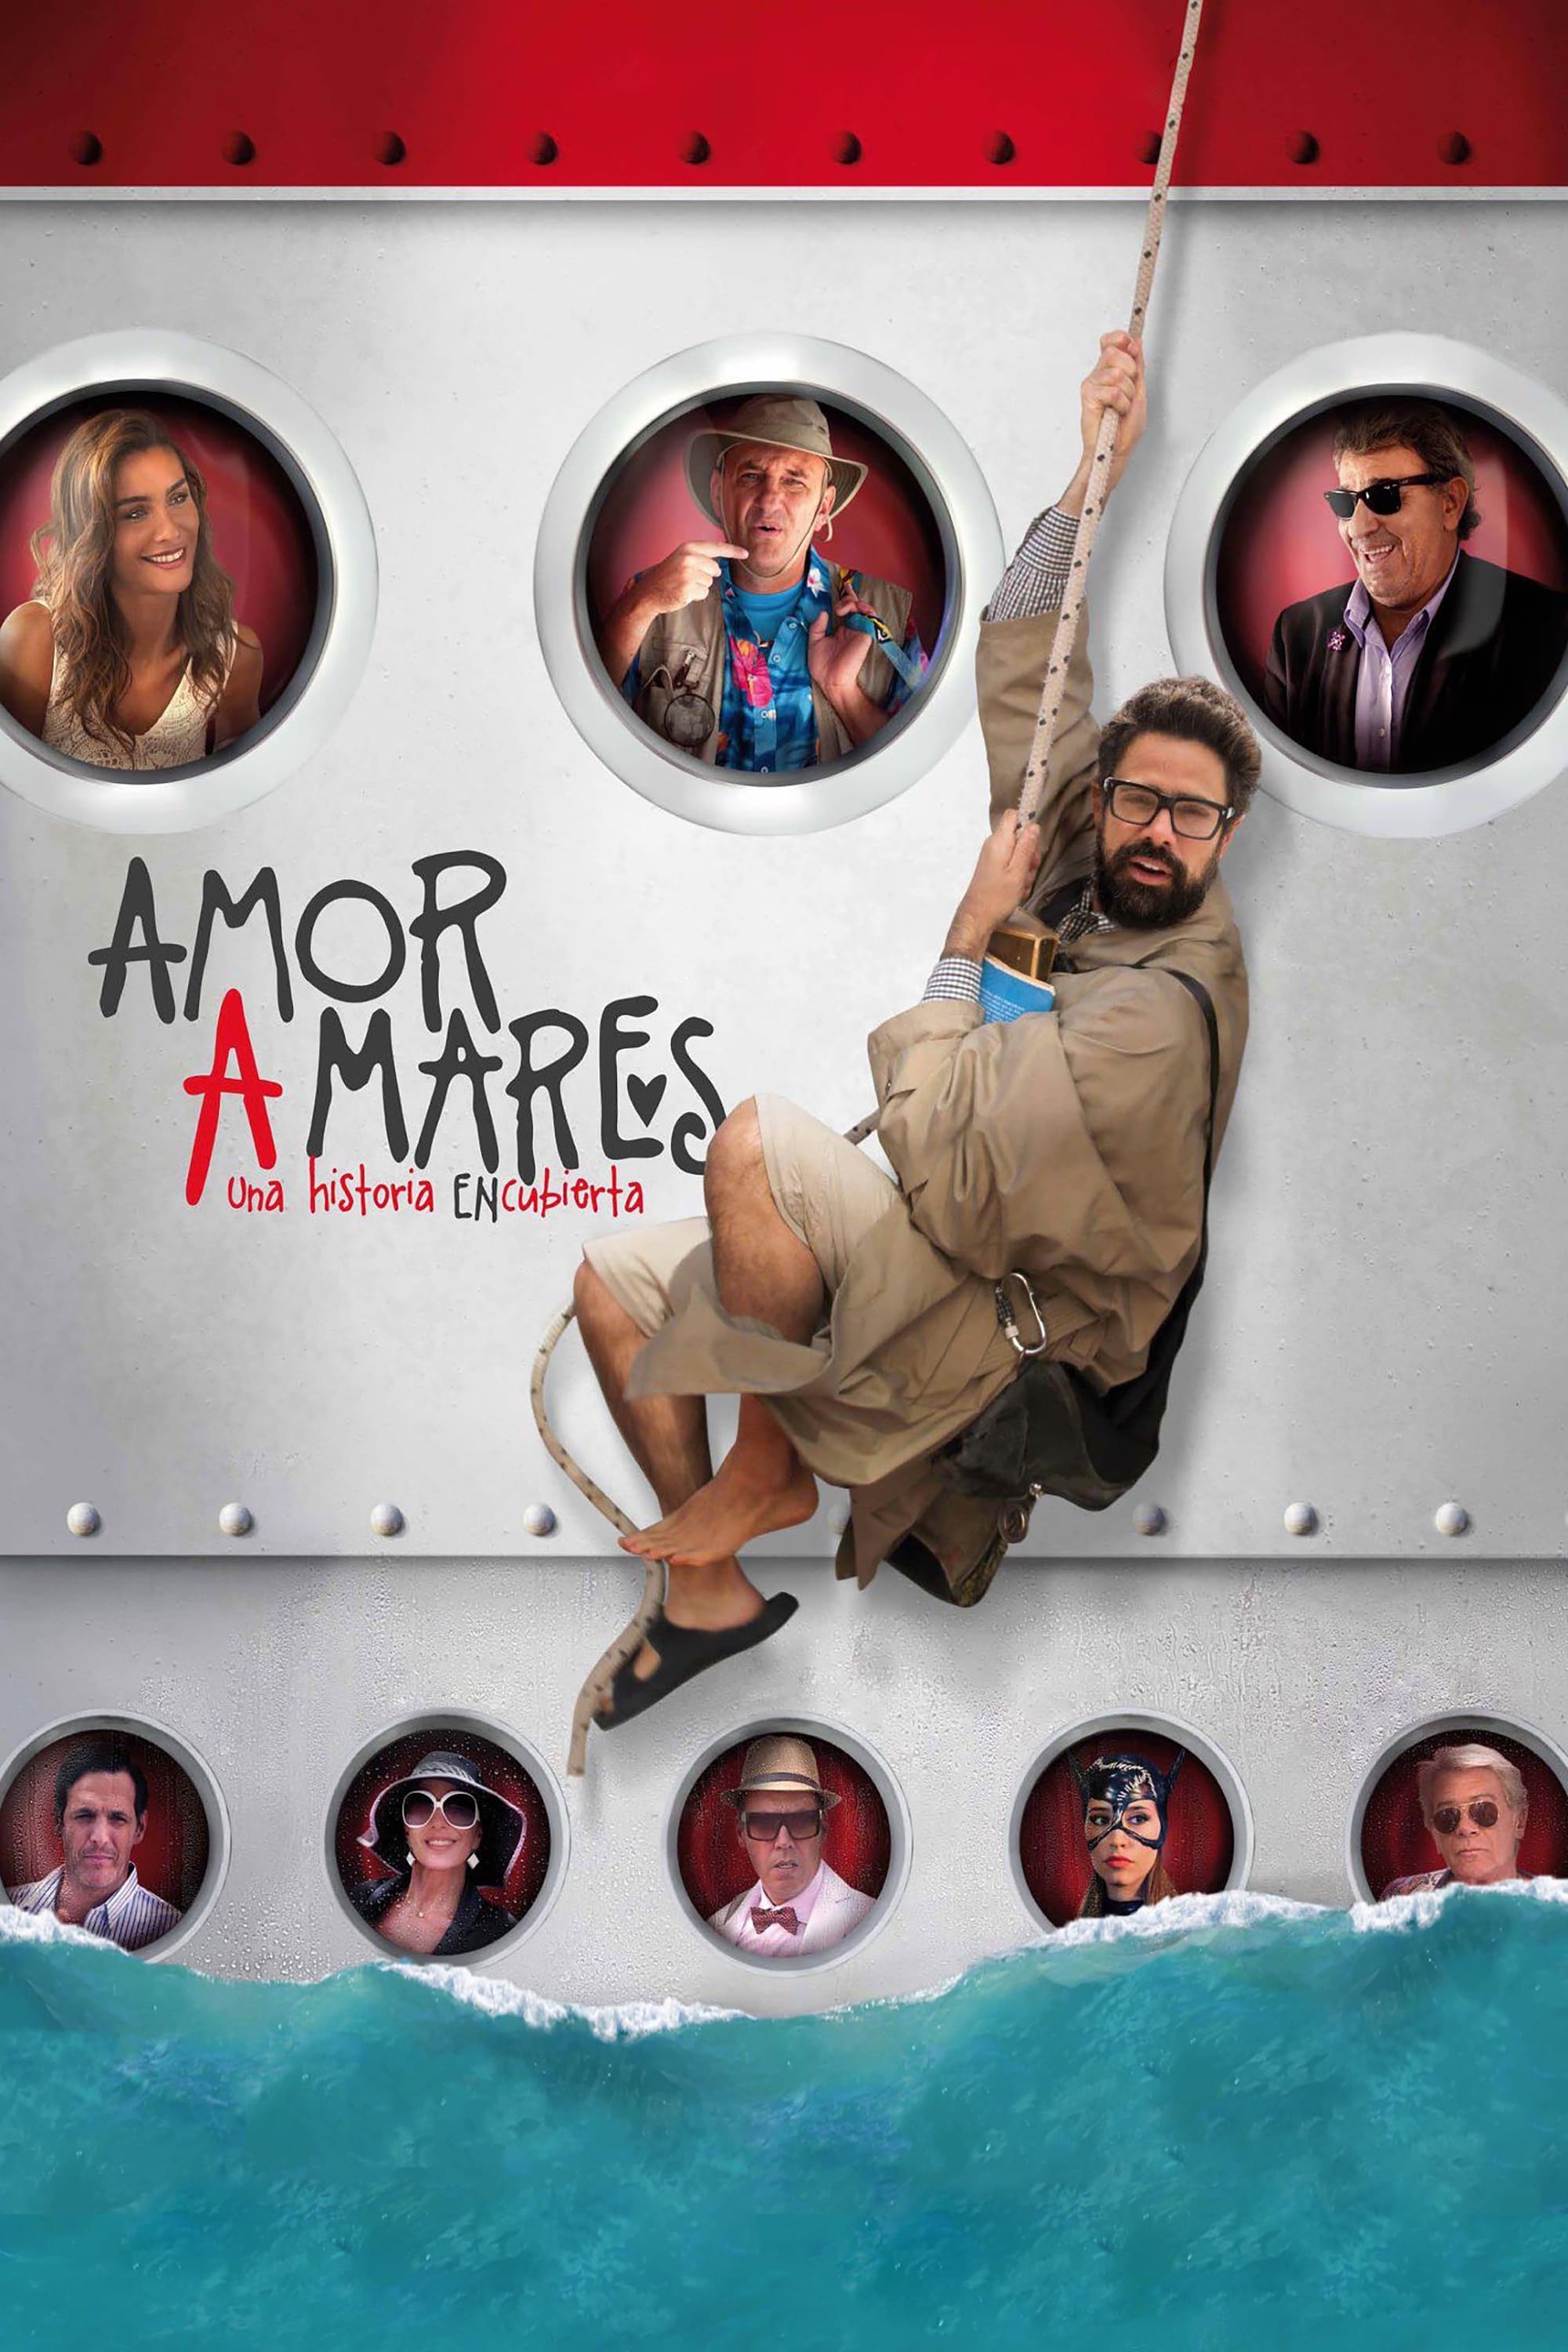 Amor a mares (2012)